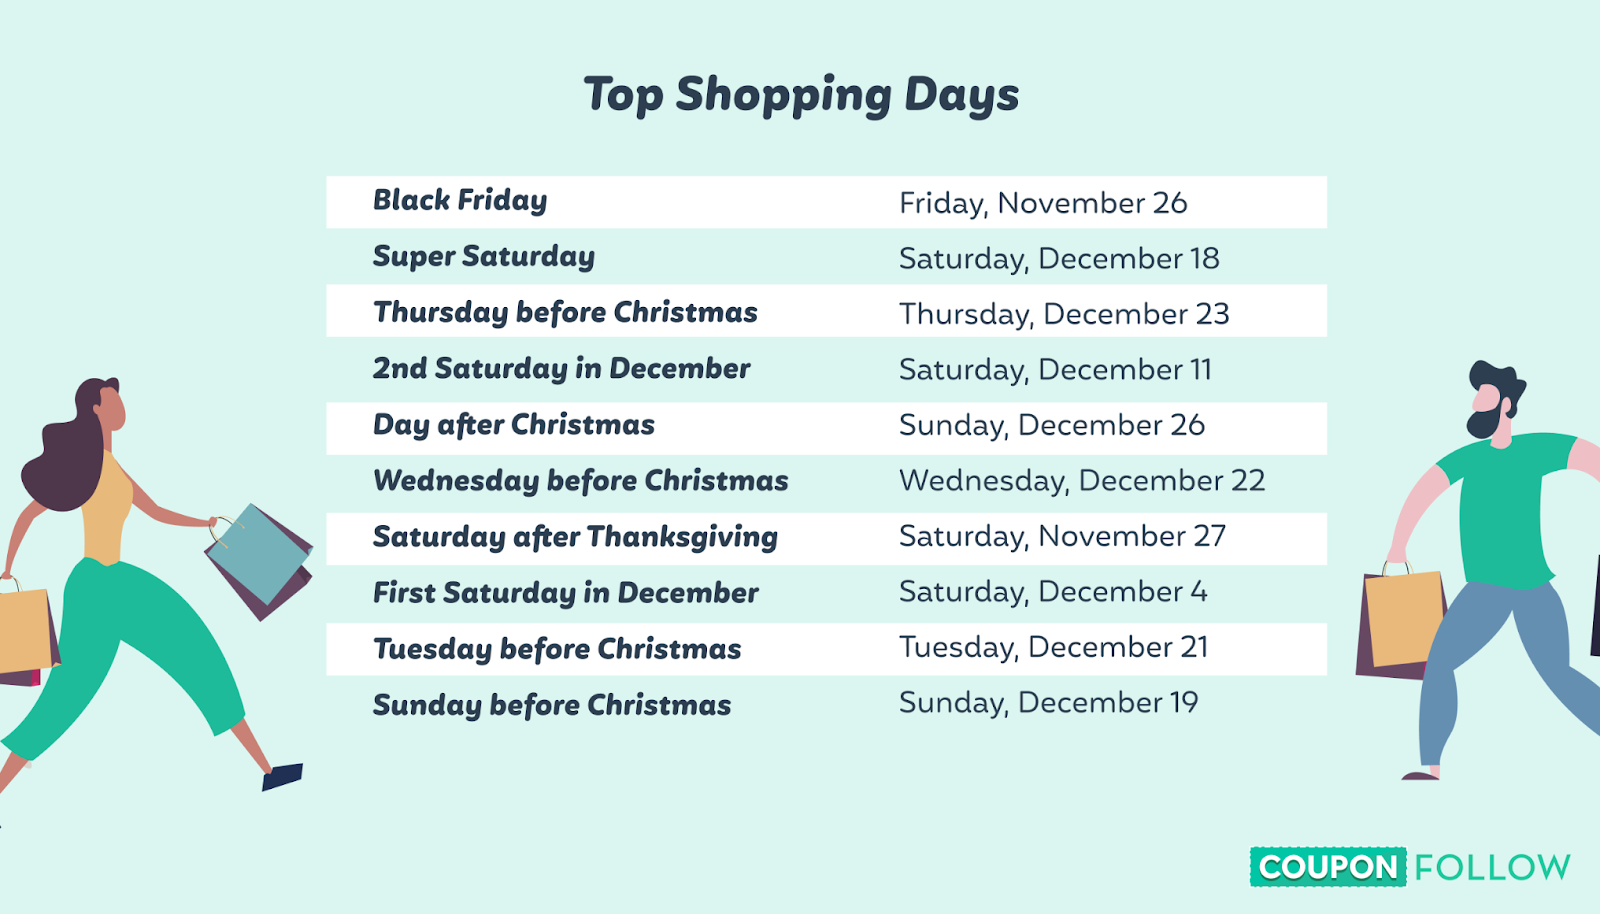 Biggest shopping days of the year